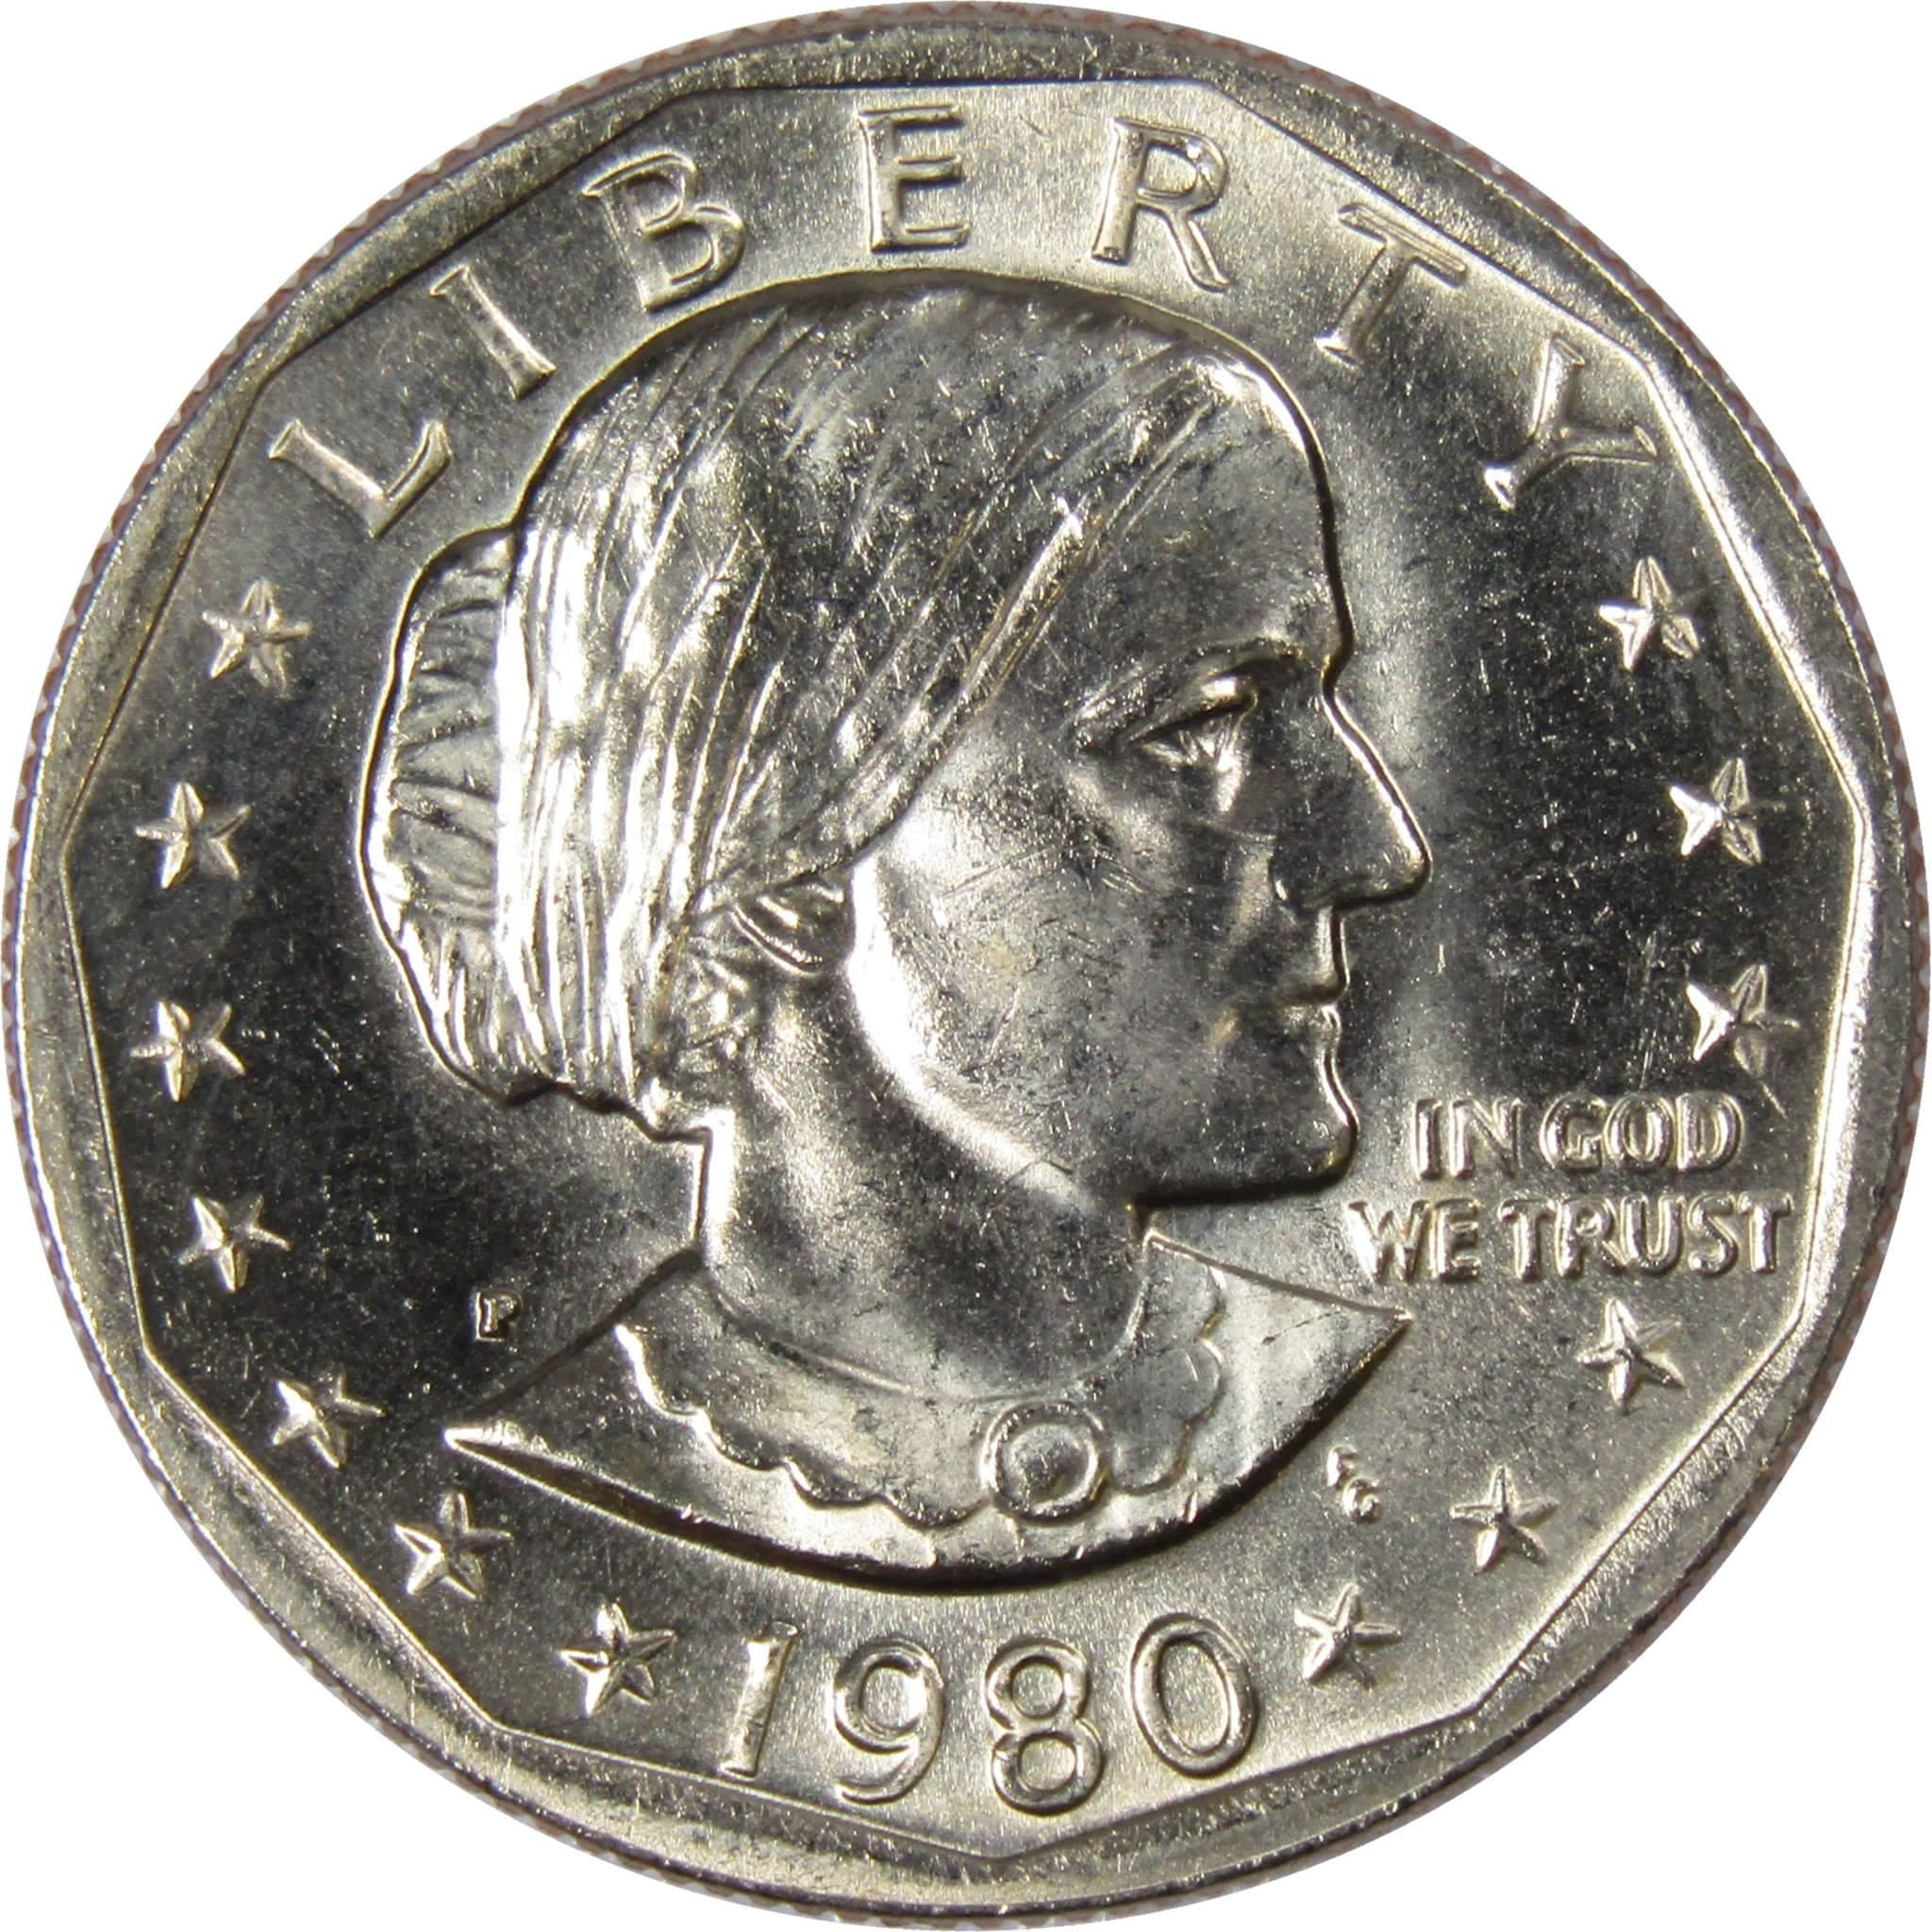 1980 P Susan B Anthony Dollar BU Uncirculated Mint State SBA $1 US Coin